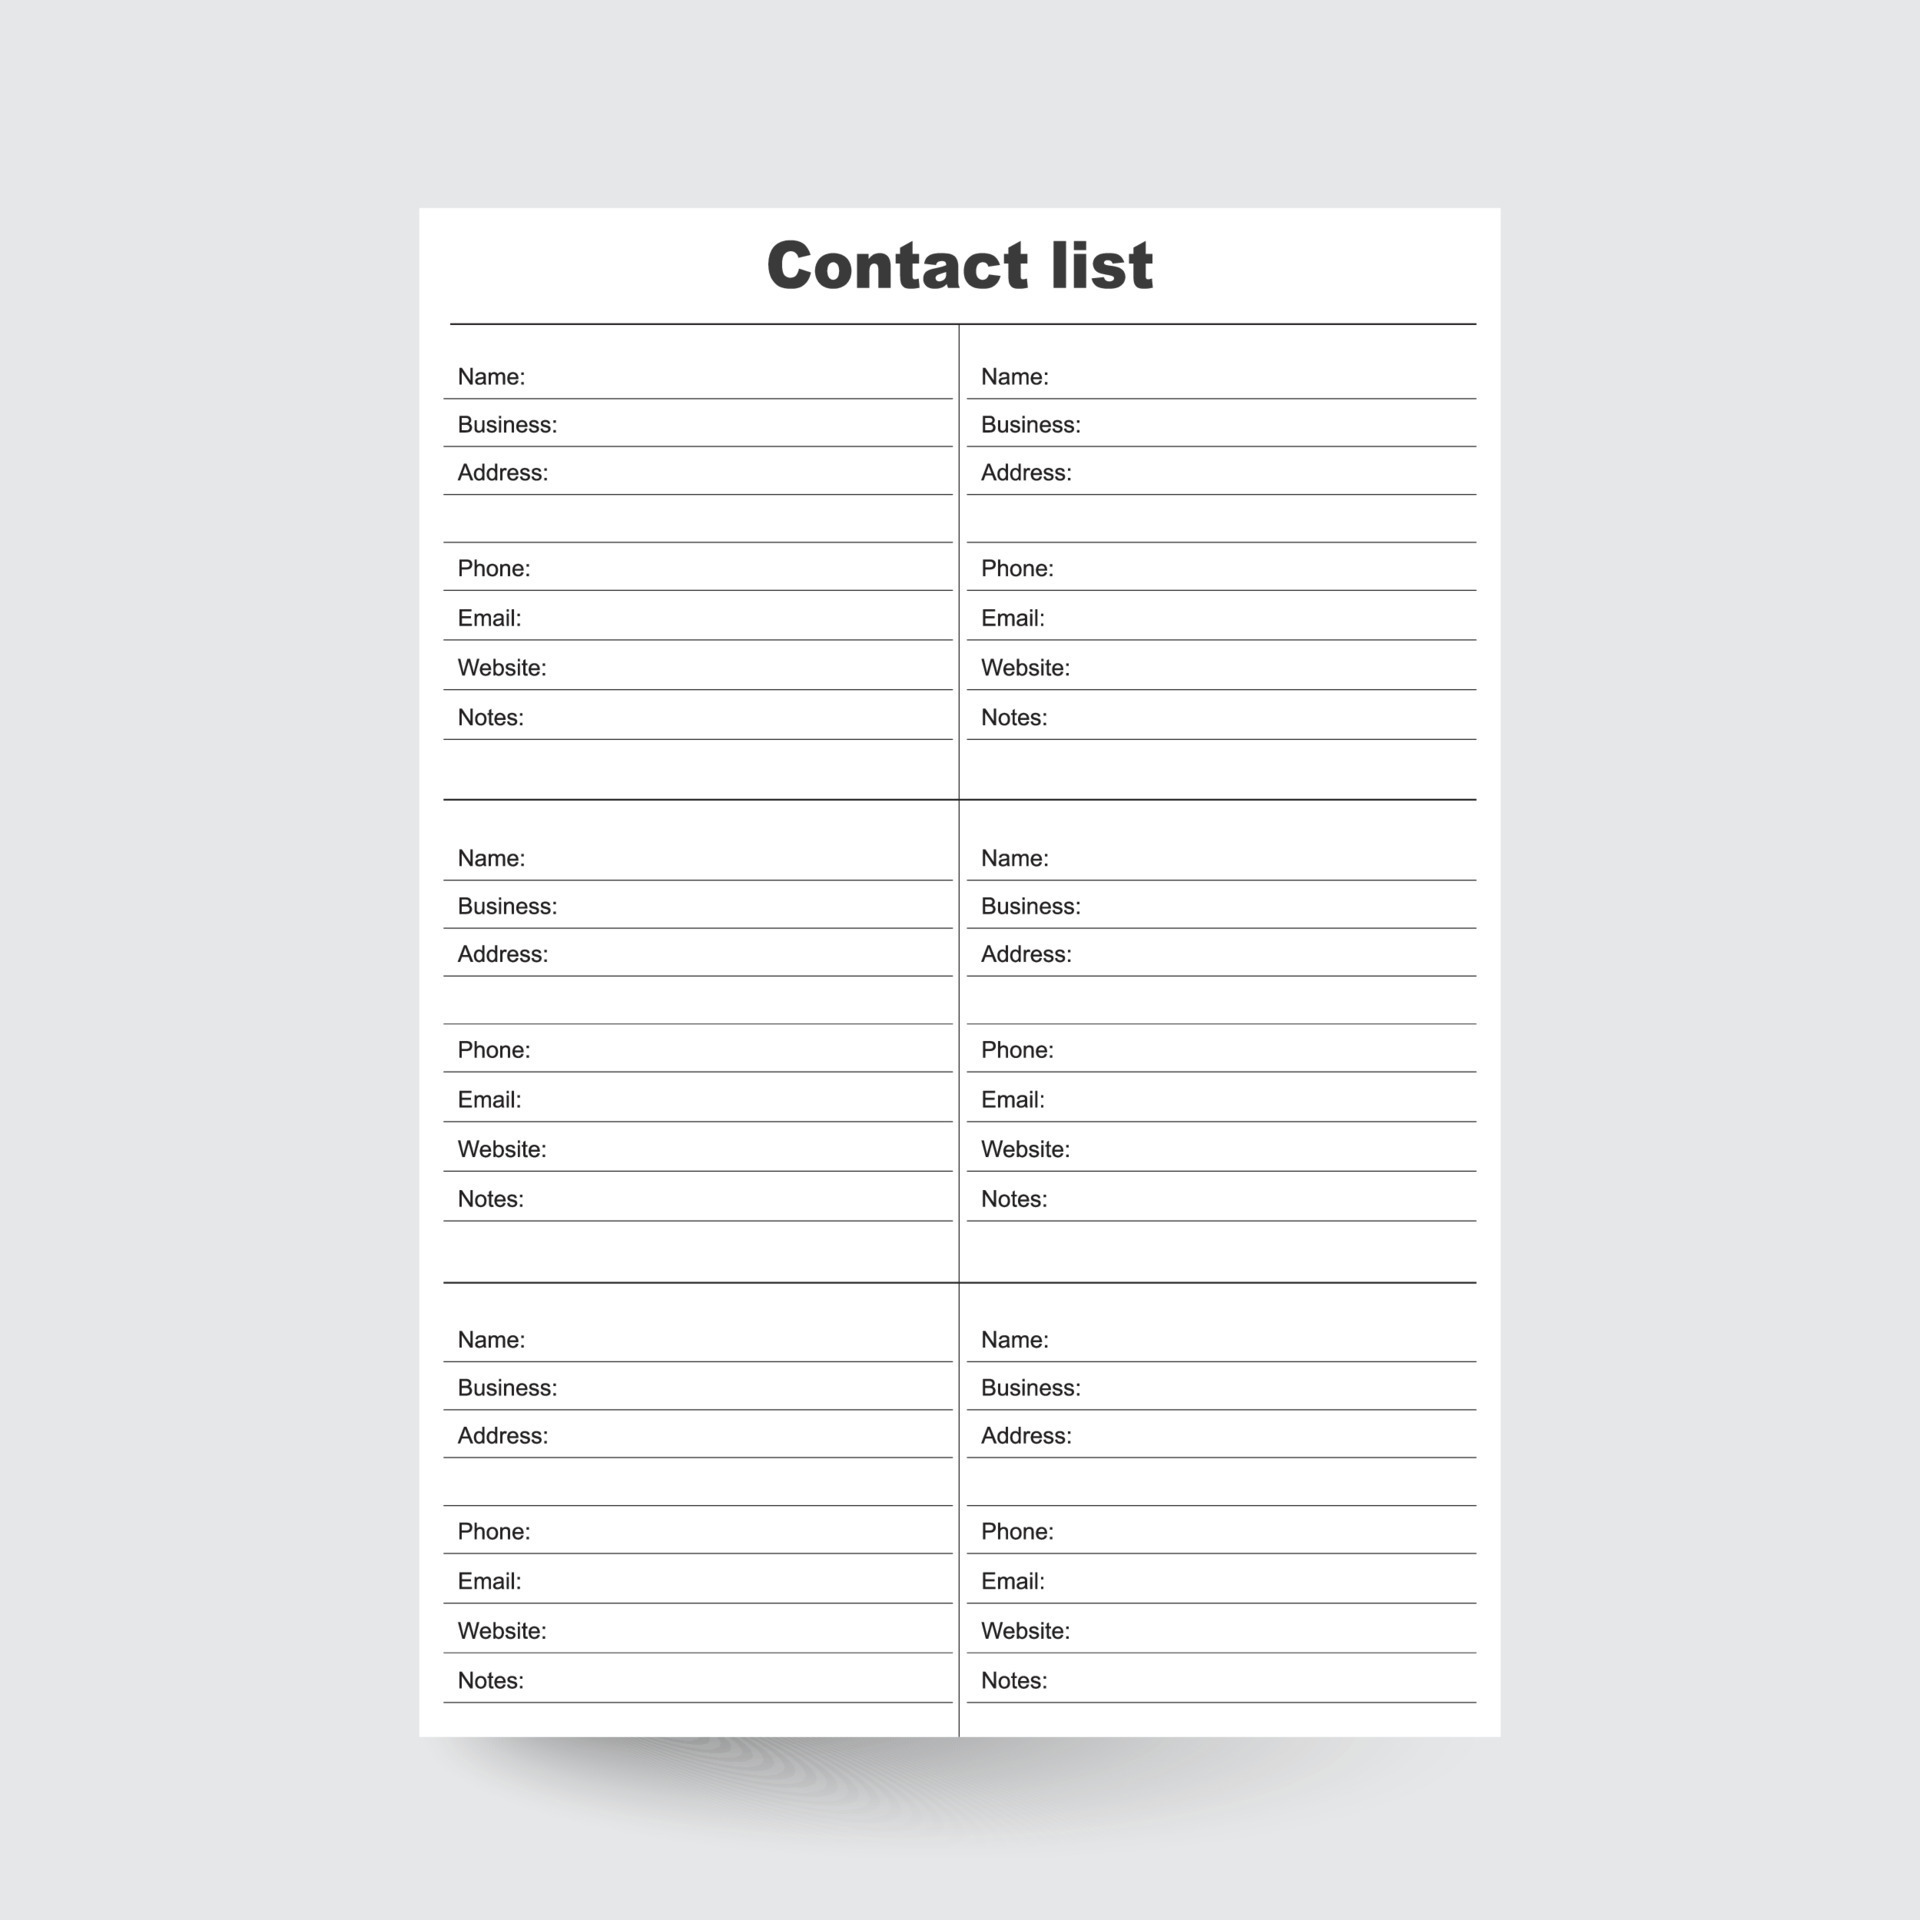 Contact List,Contacts Planner,Contact Sheet,Digital Contact List